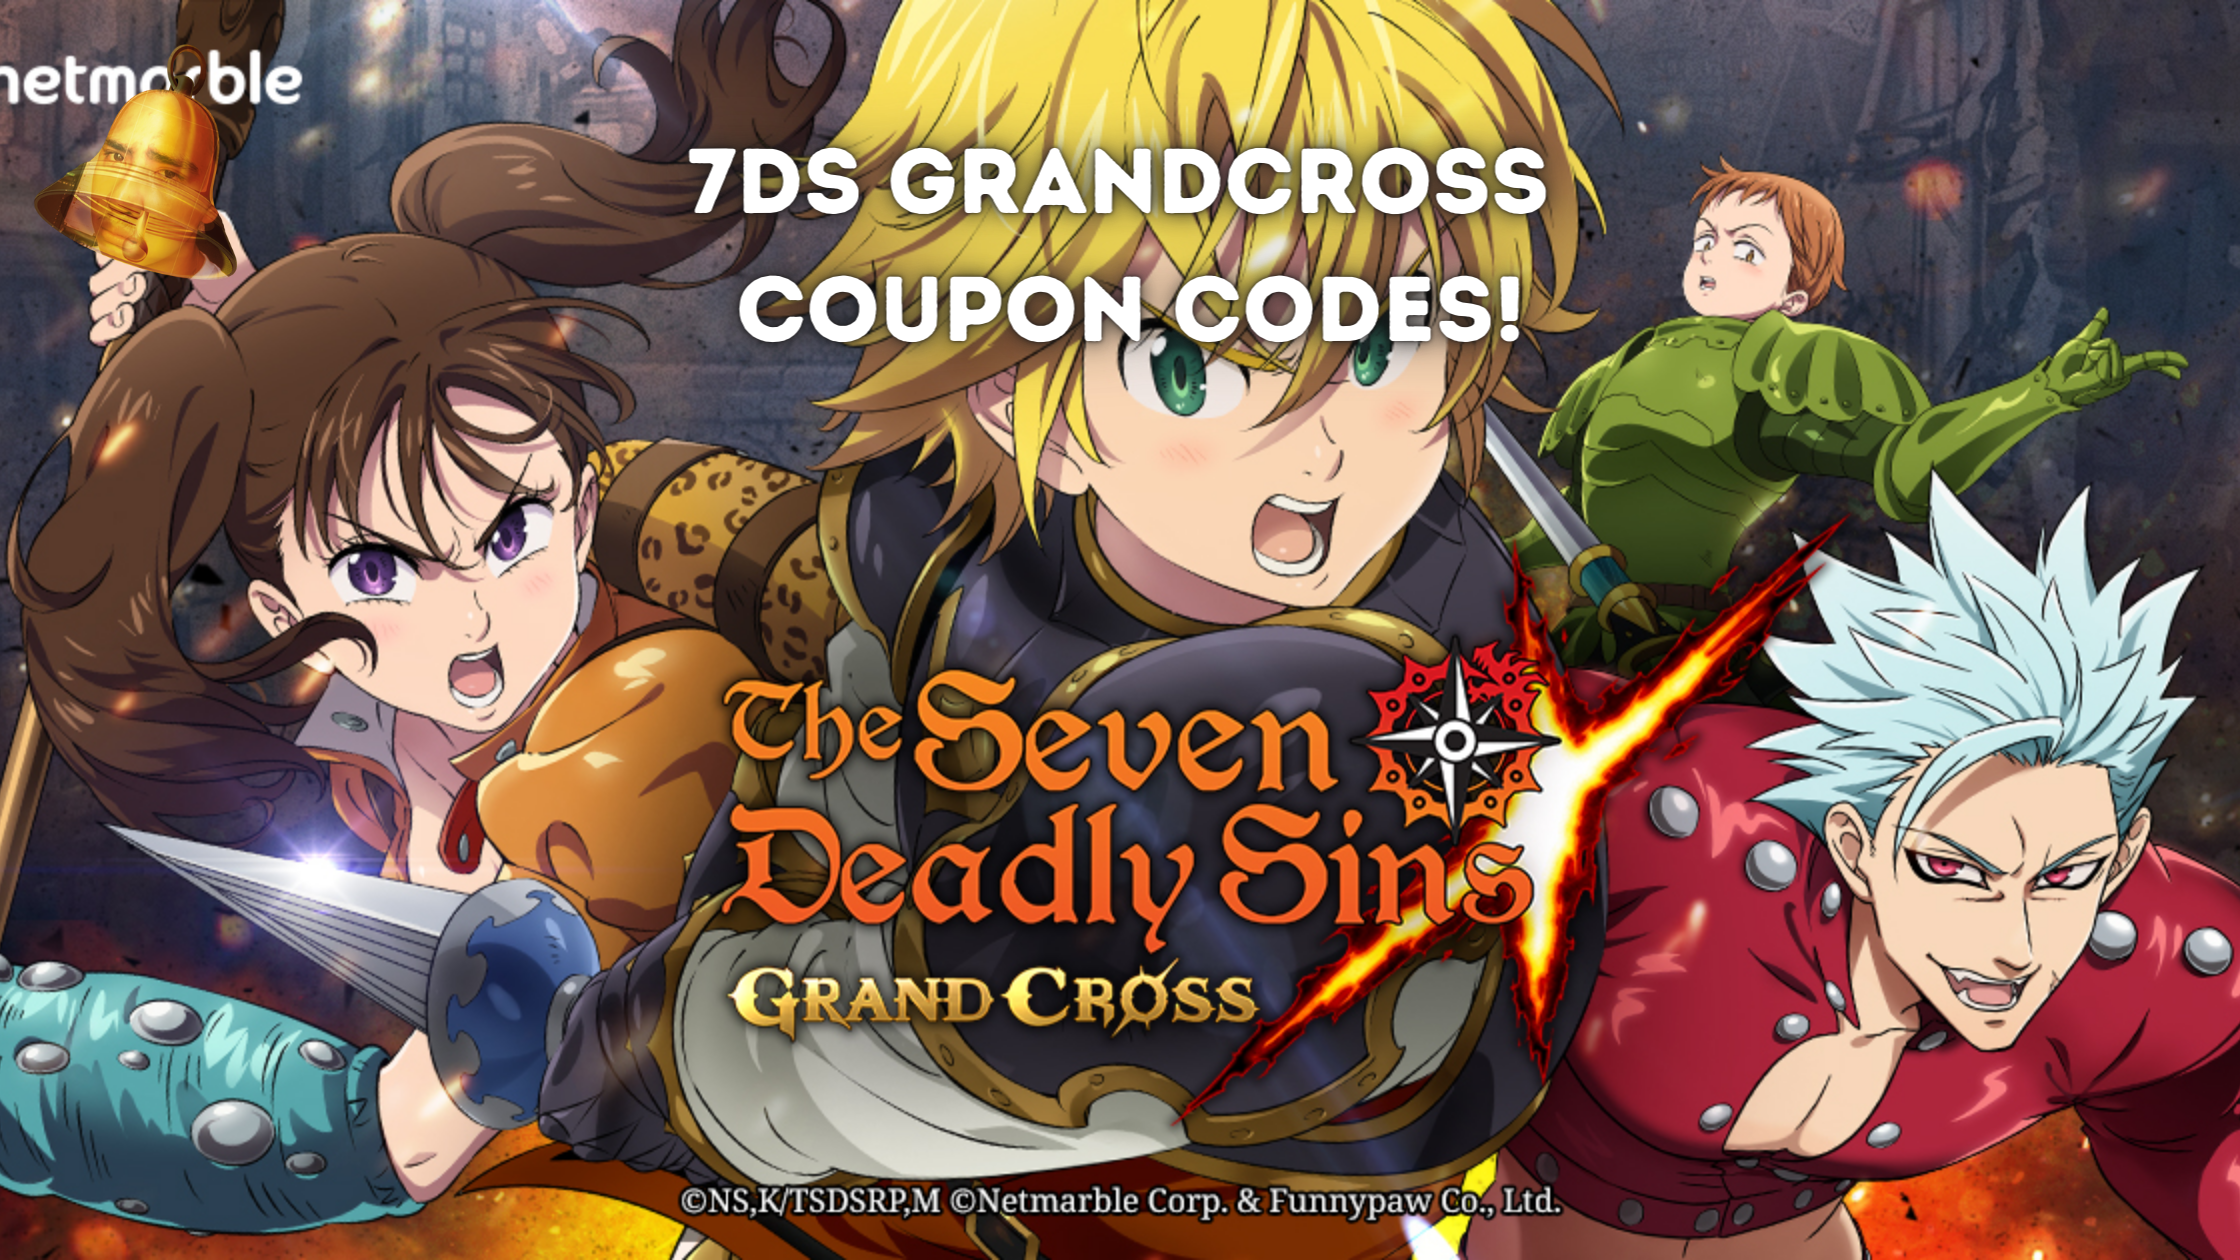 7ds Grandcross Coupon Codes